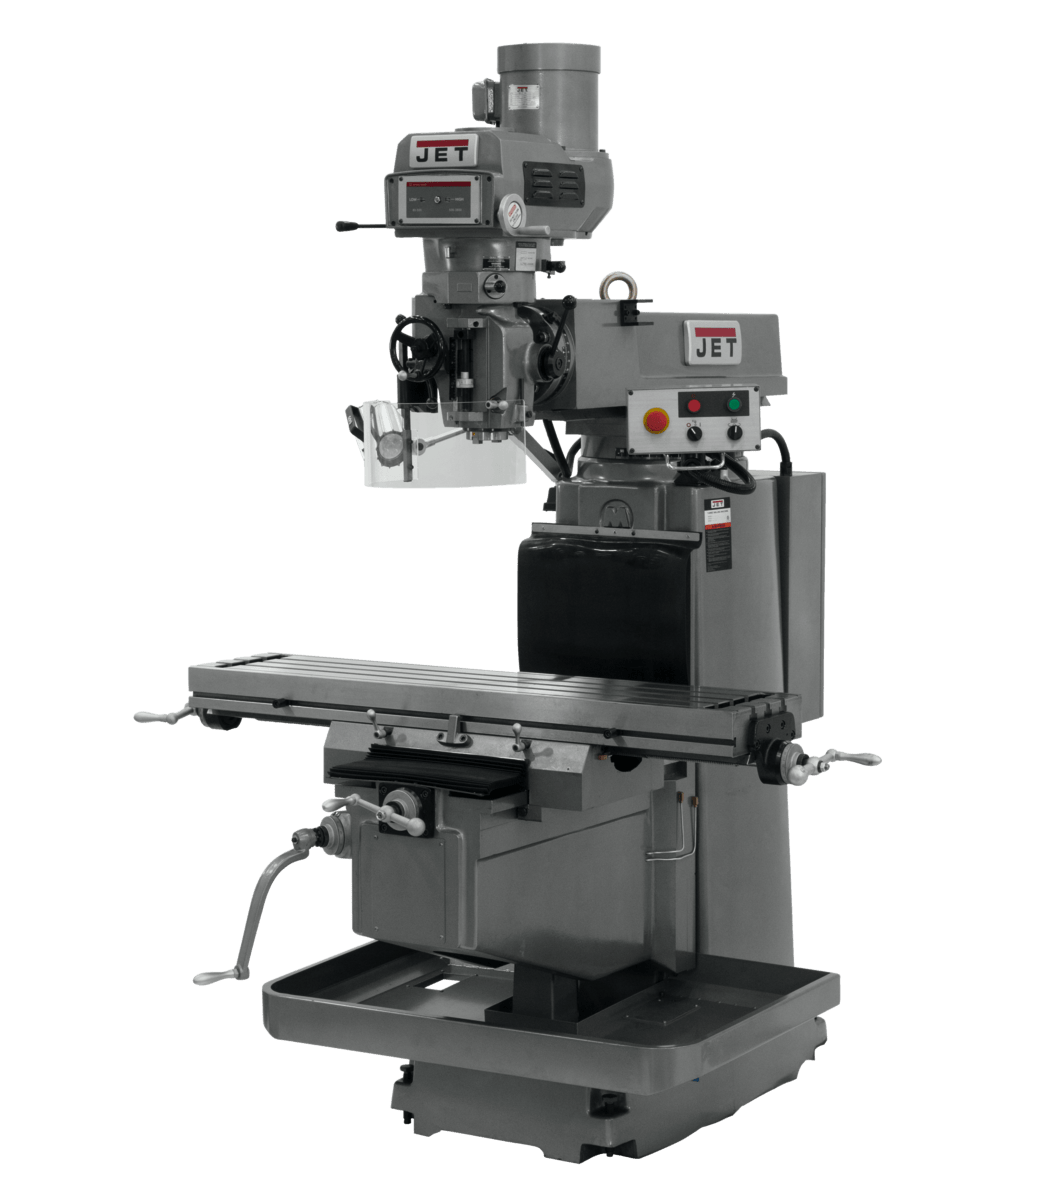 JTM-1254VS with 3-Axis ACU-RITE G-2 MILLPOWER CNC - Jet